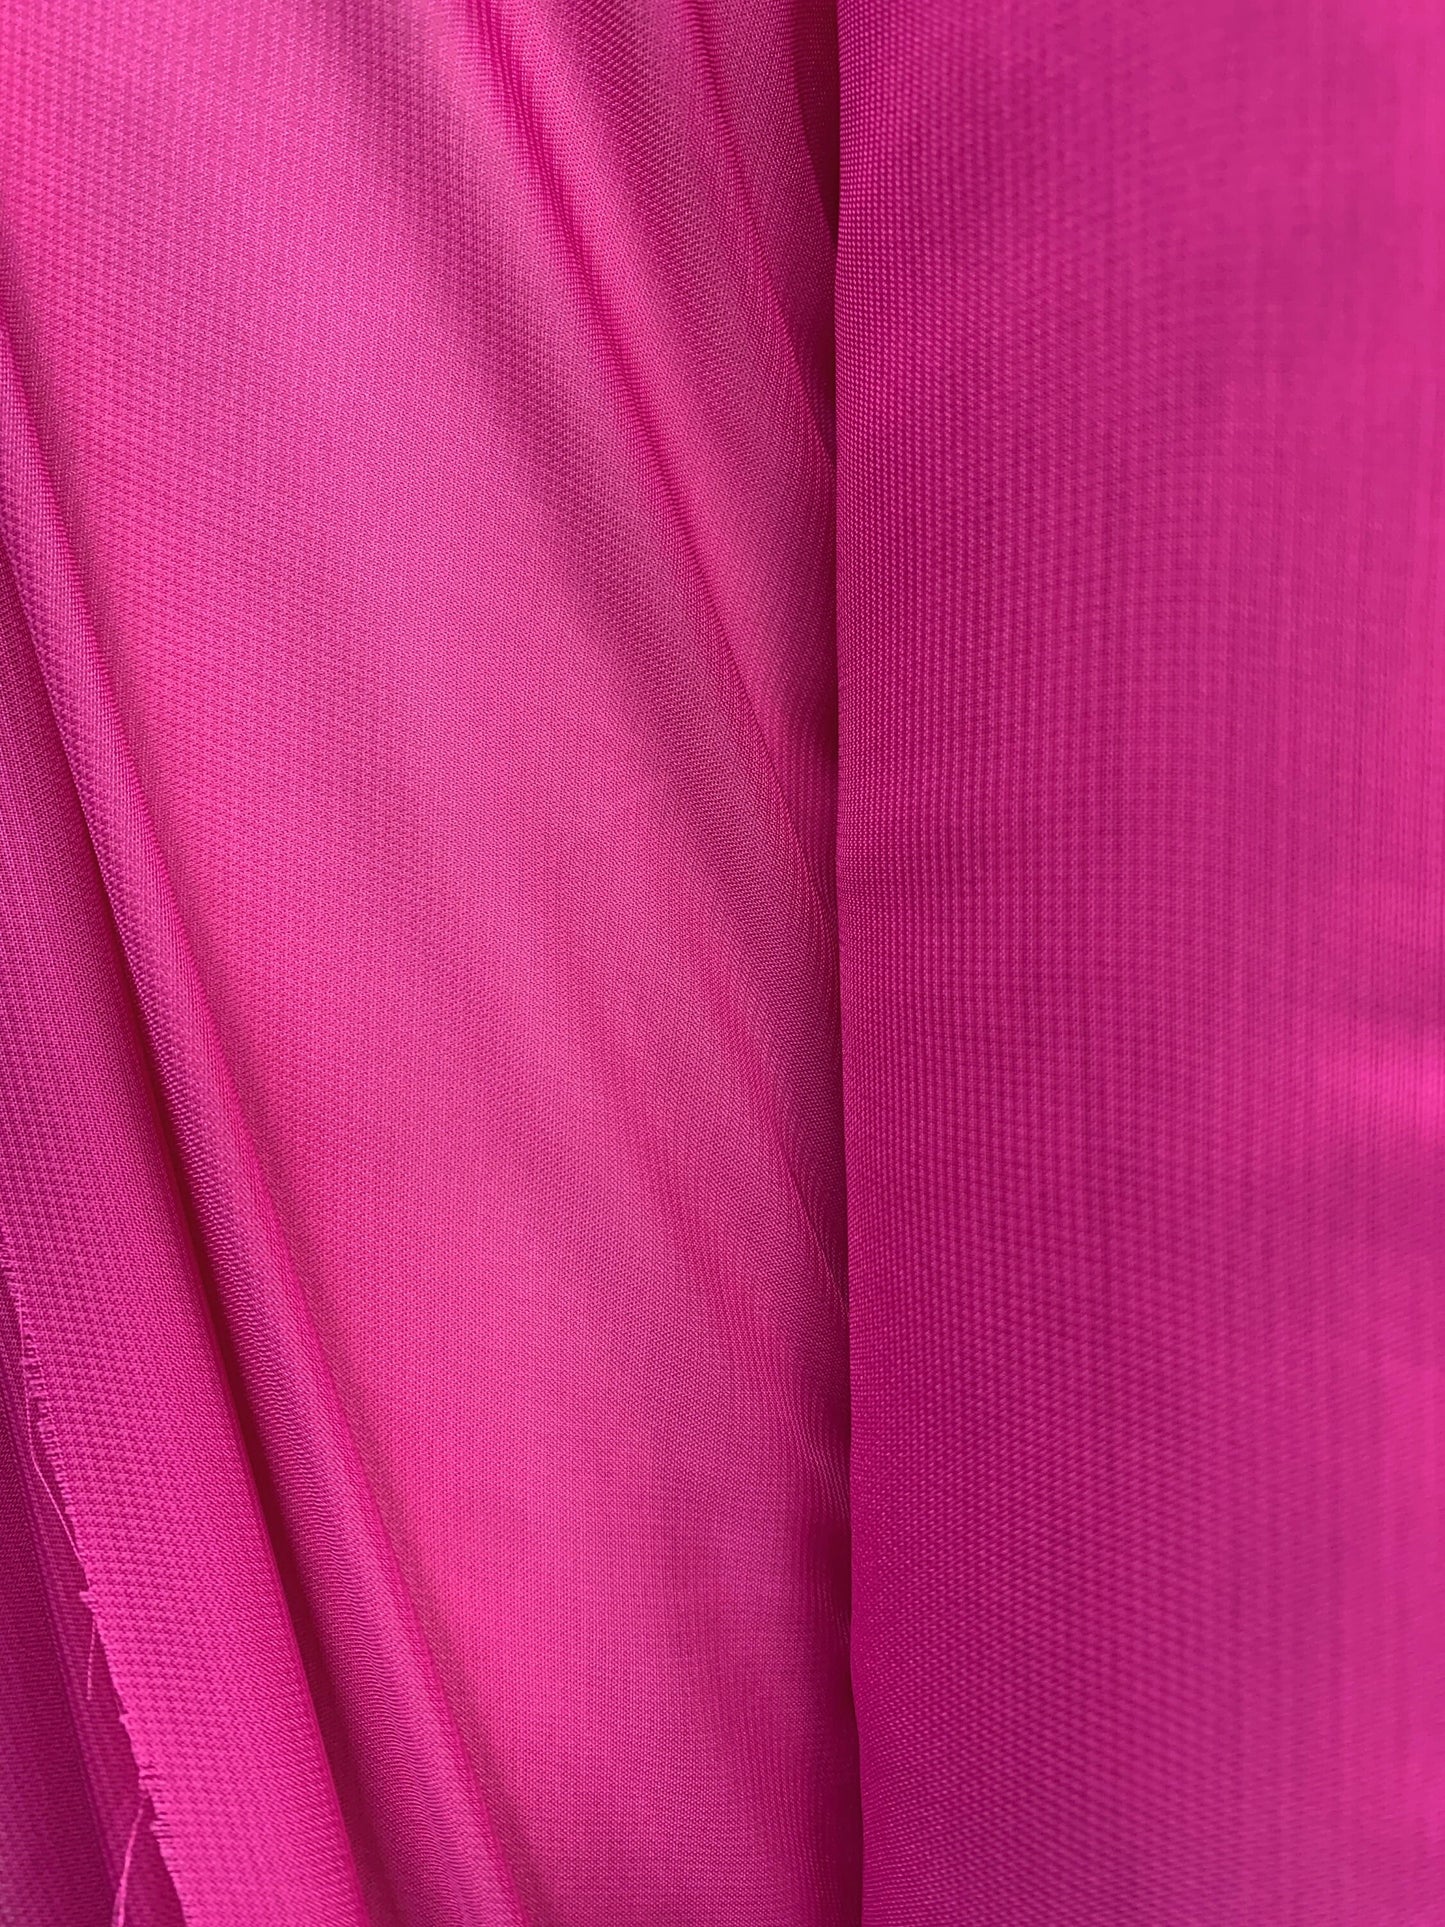 FUCHSIA PINK Sheer Solid Polyester Chiffon Fabric (60 in.) Sold By The Yard